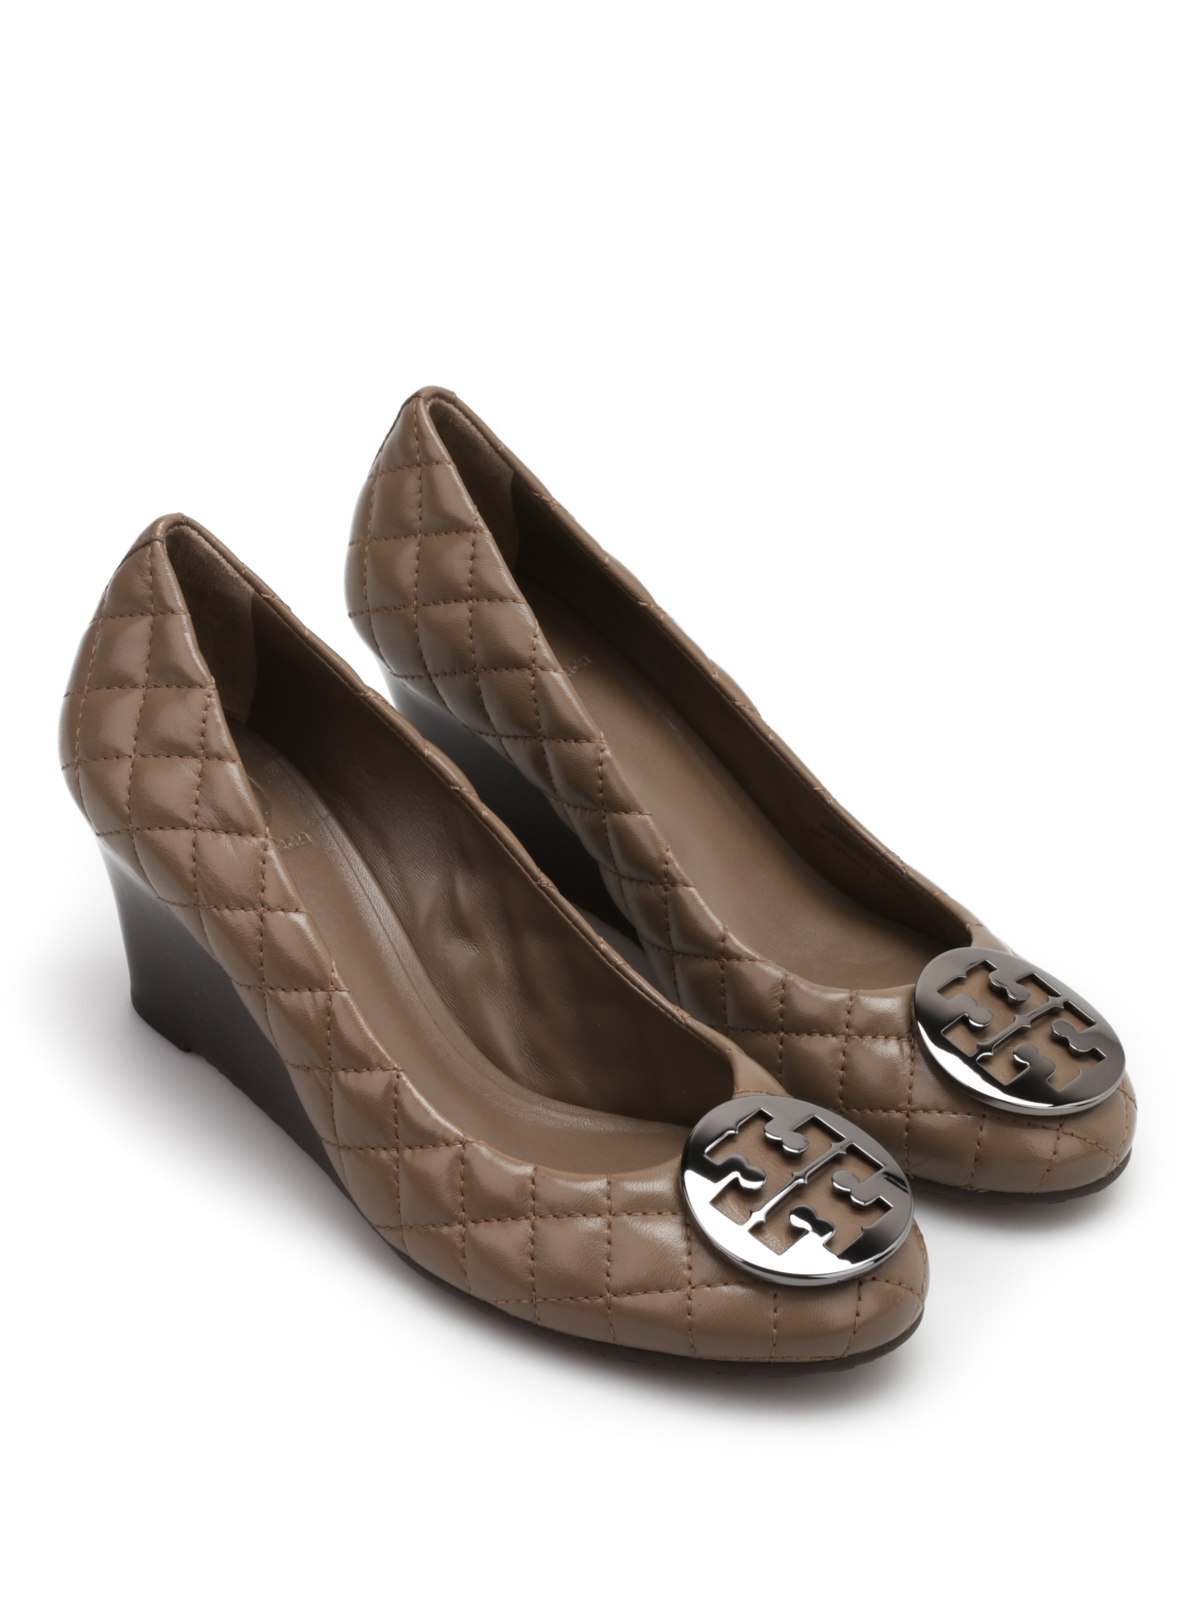 tory burch quilted wedge